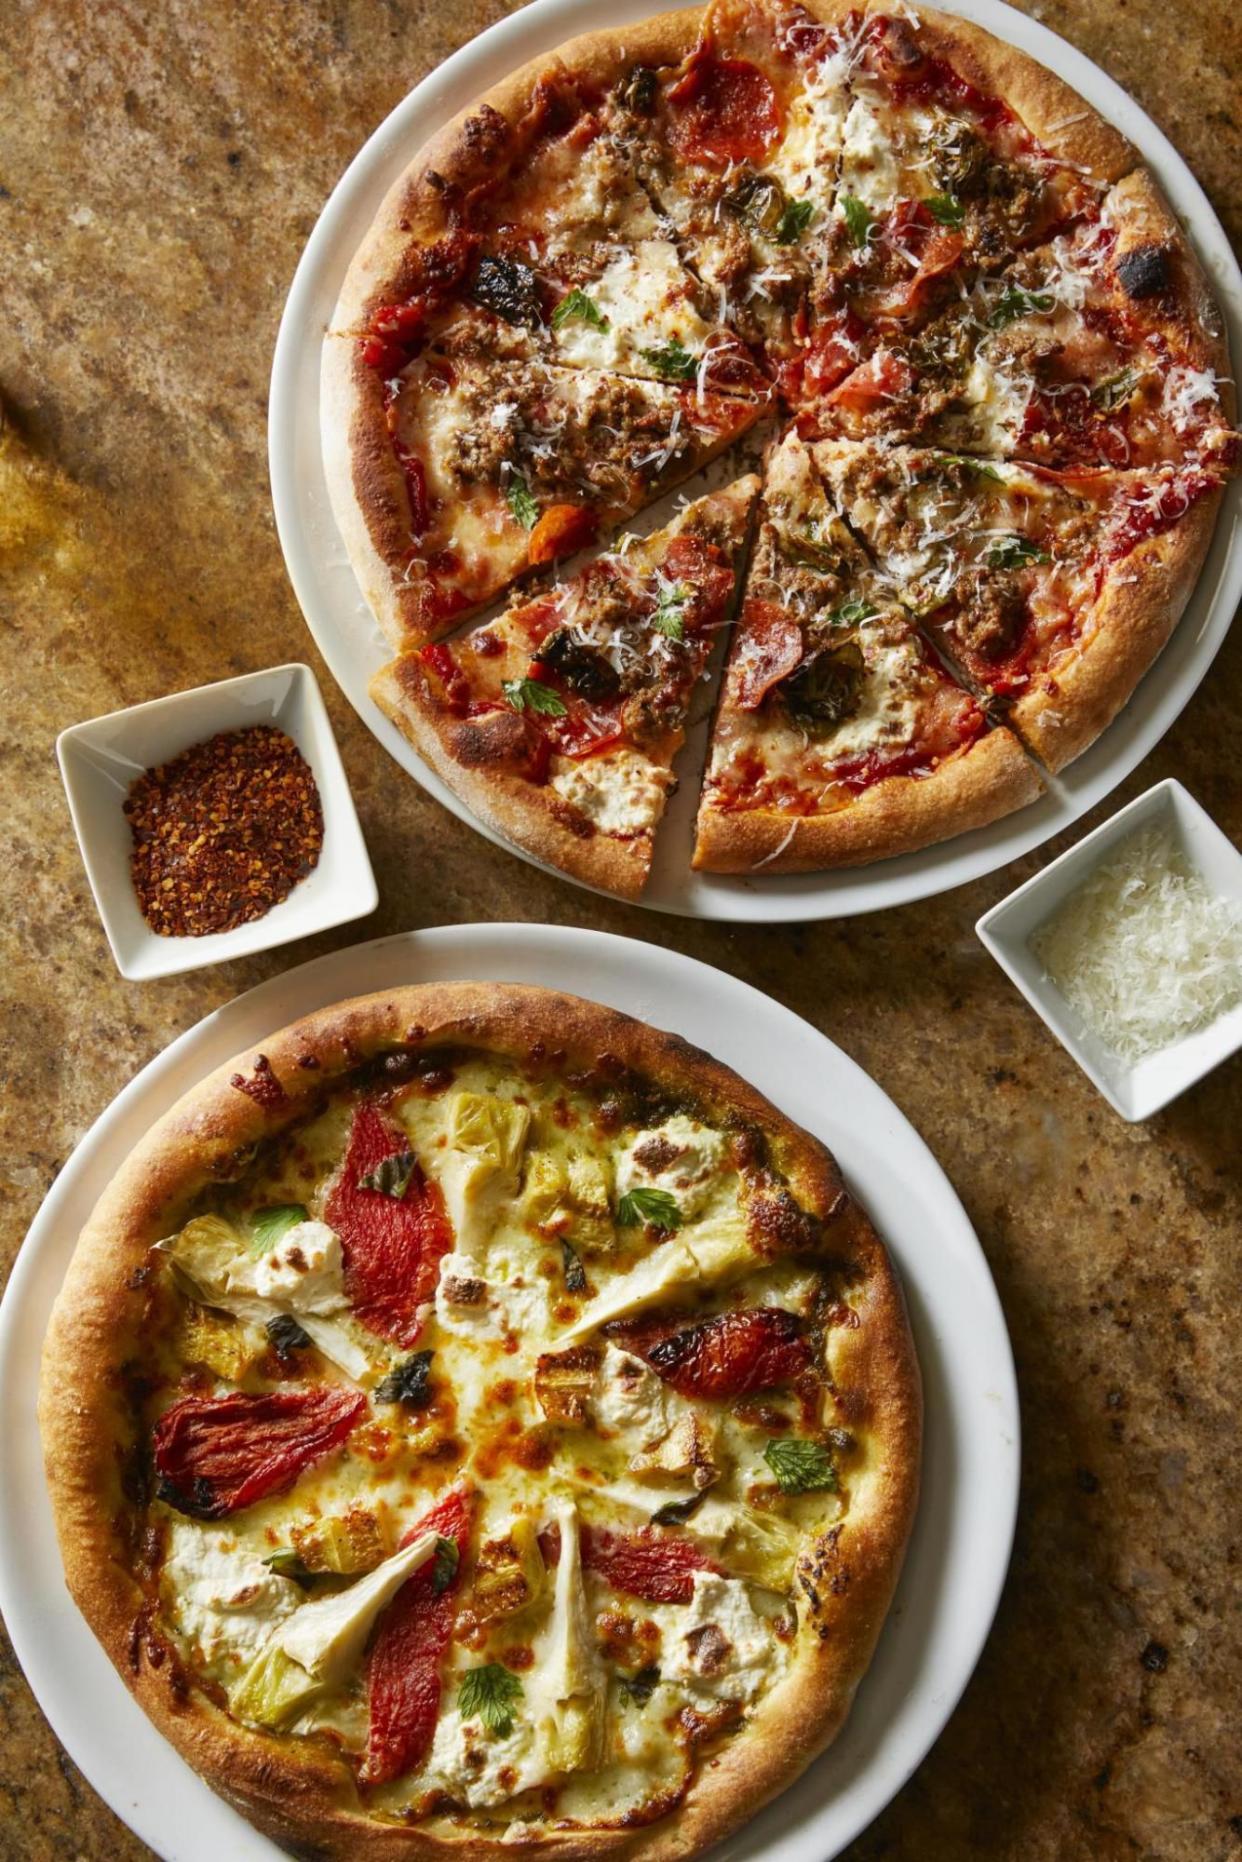 Different wood-fired pizzas are among the menu options at the Borgata's newest eatery, American Bar & Grille.